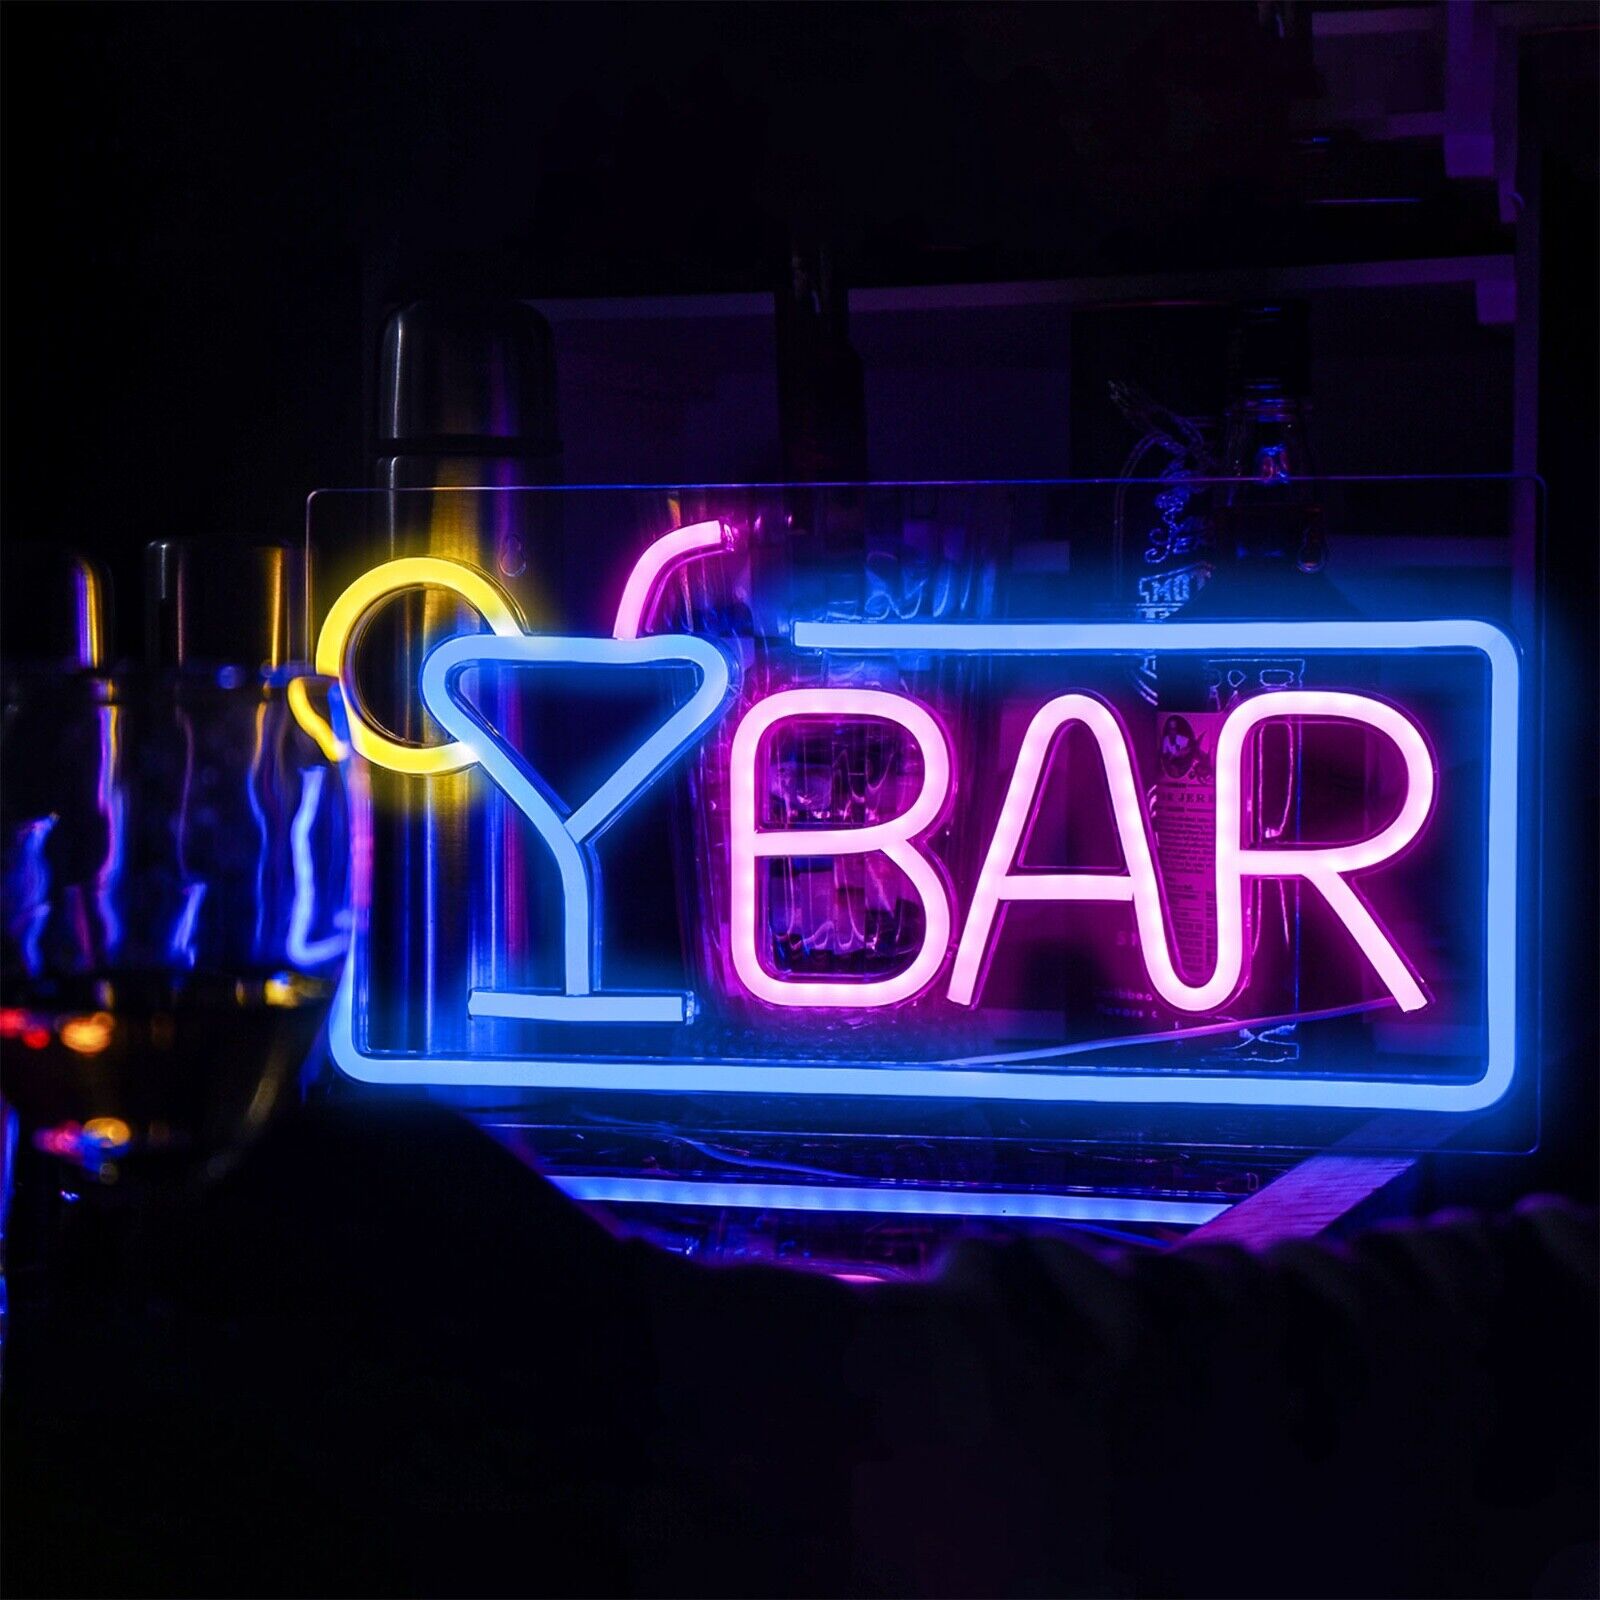 Leburry Bar Neon Led Light - Neon Sign Wall Decor For Bar,Home, Party, Cocktail